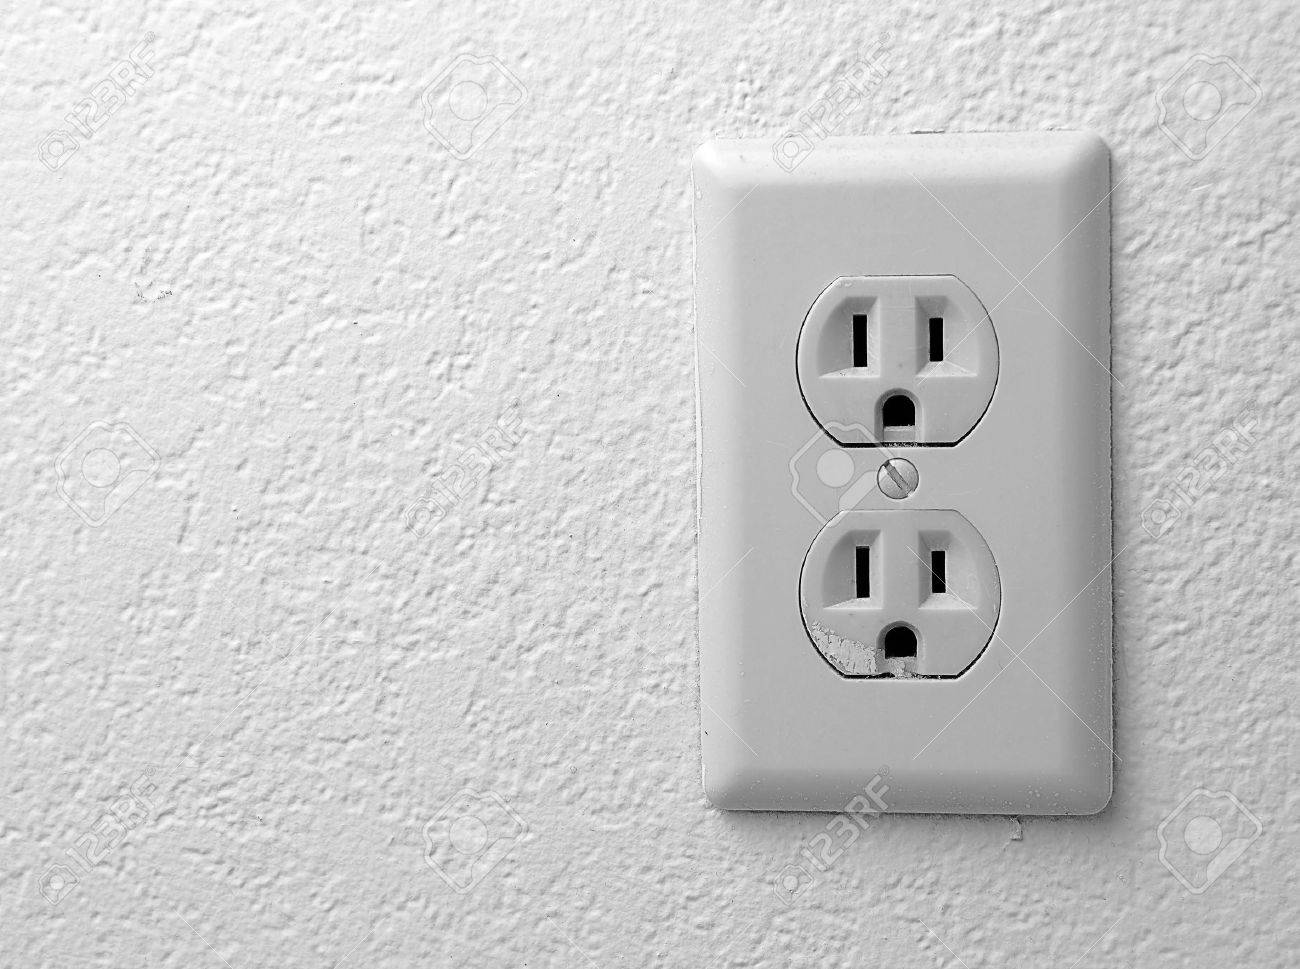 Electric Outlet On The Texturazed Wallpaper Stock Photo Picture